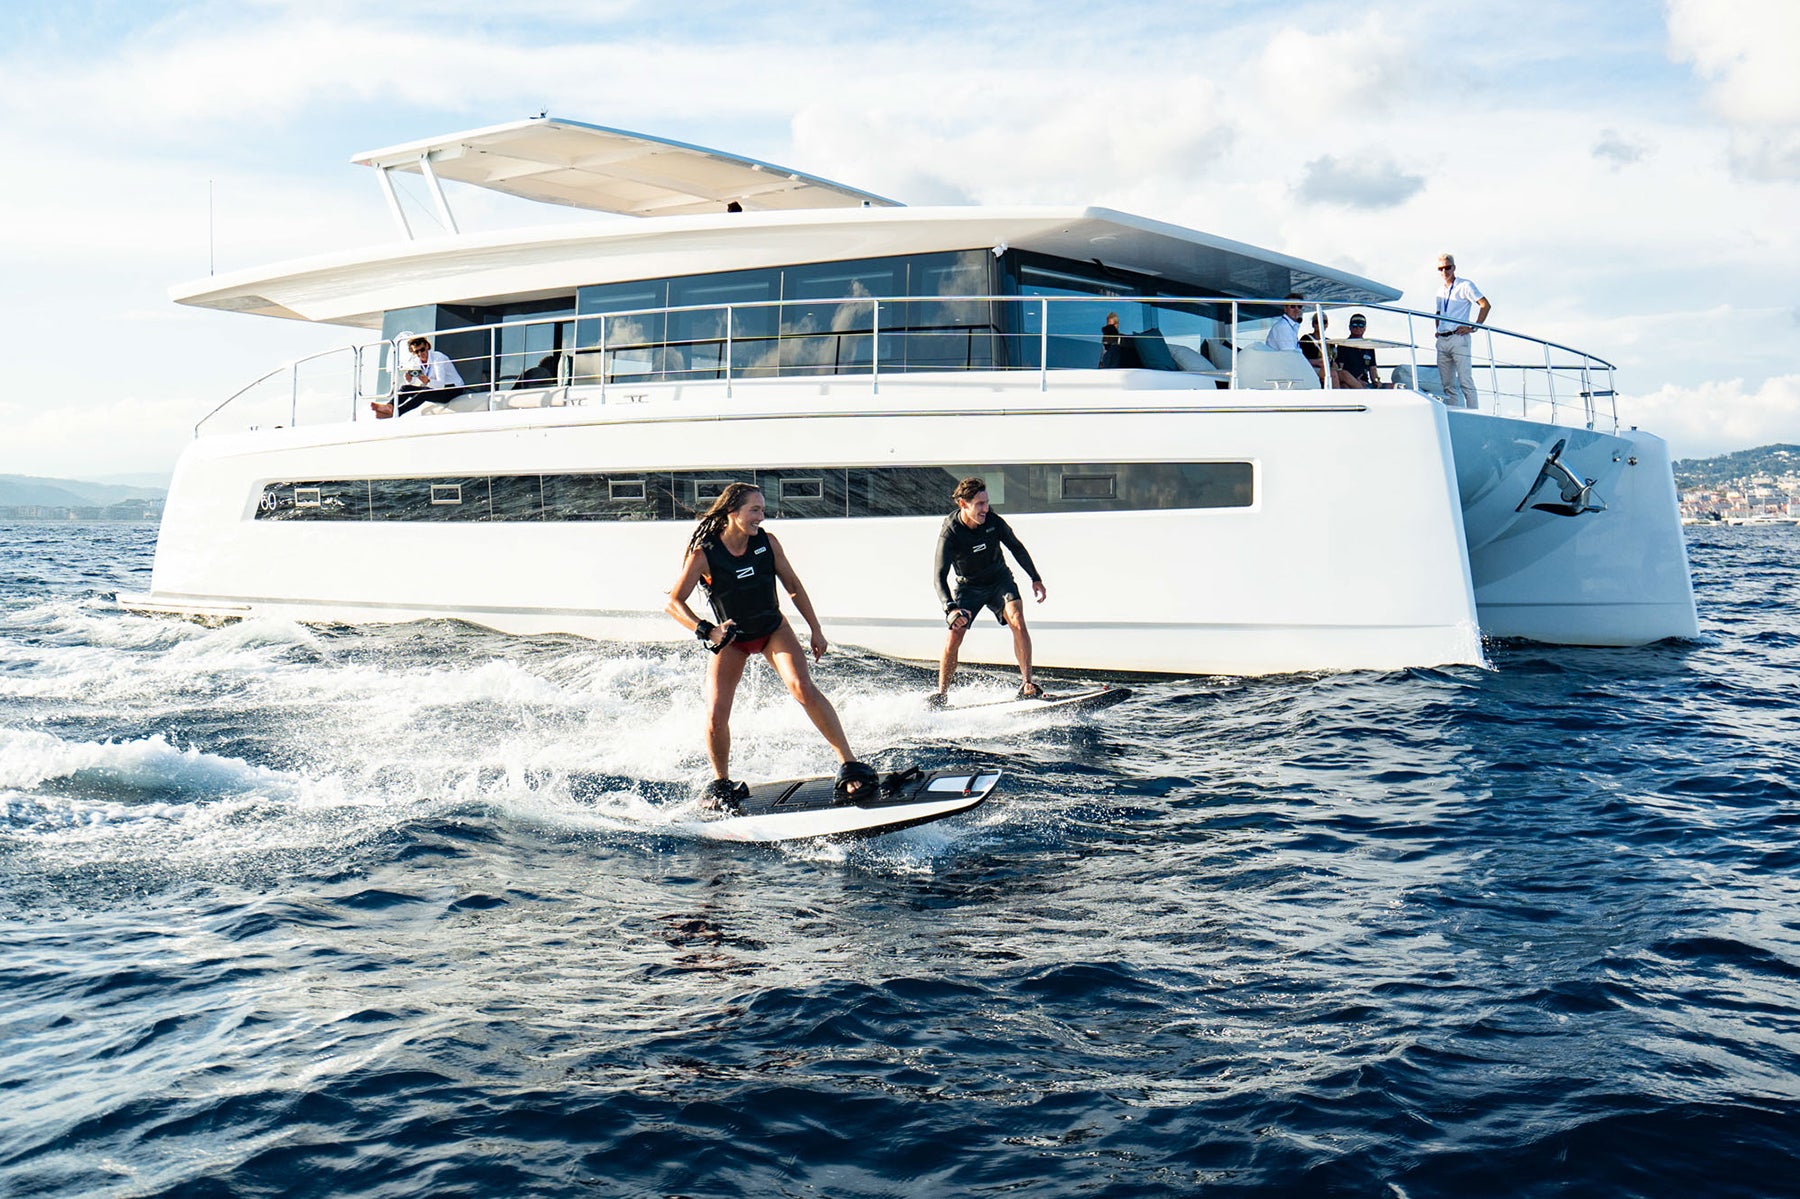 A man and a woman ride Awake RÄVIK jetboards, effortlessly speeding across the water with an electric yacht in the background, capturing a moment of excitement and luxury.